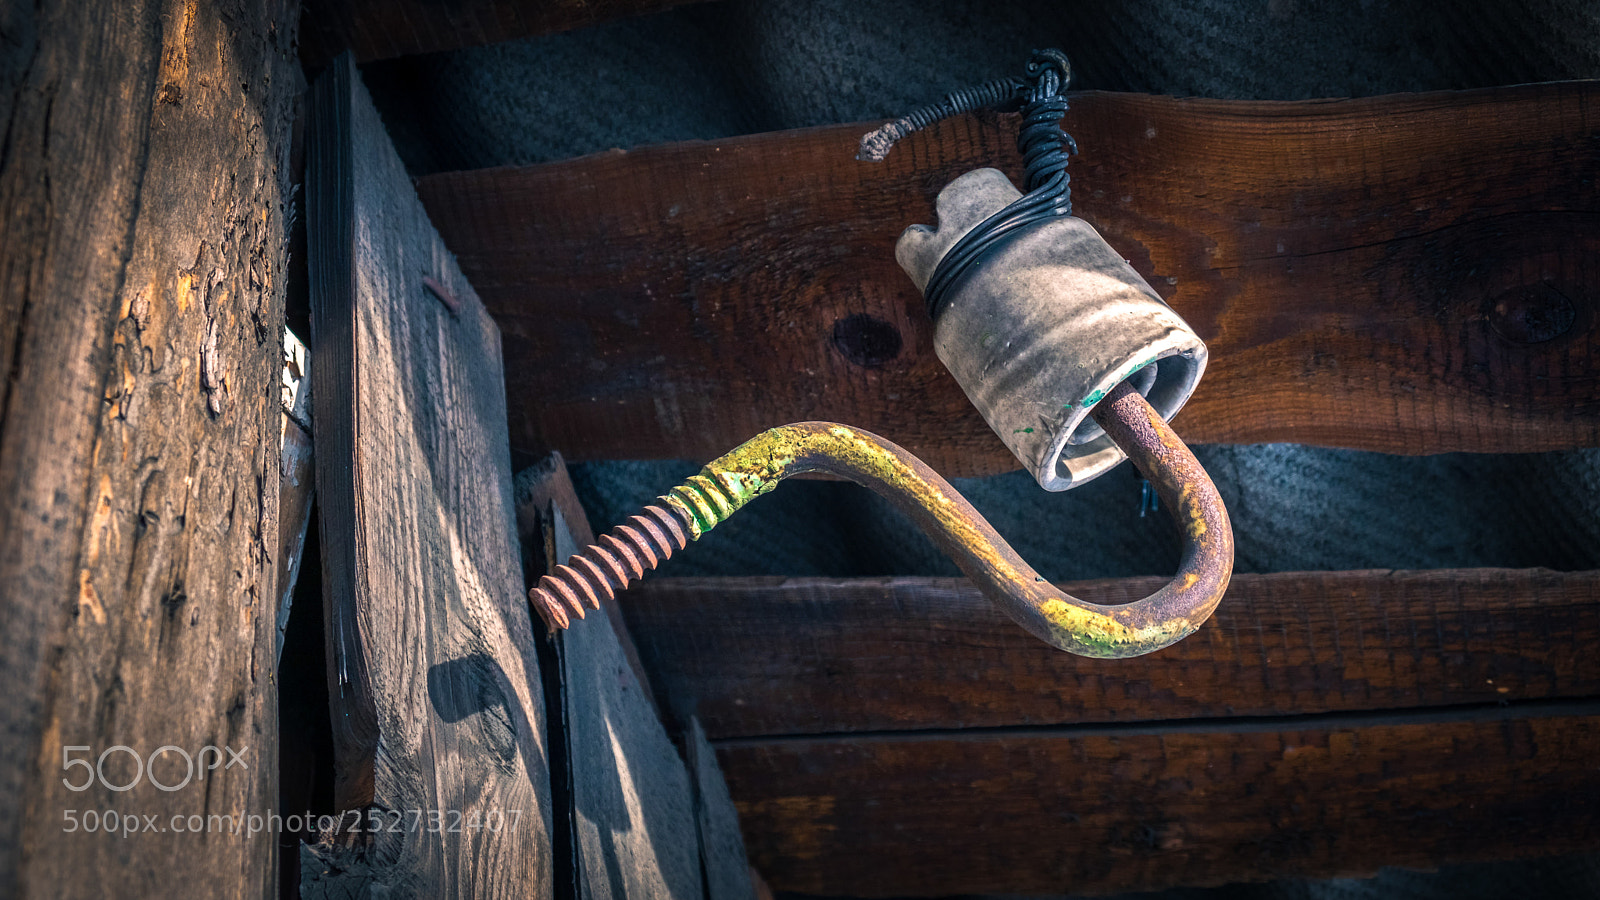 Fujifilm X-T2 sample photo. Hook with insulator on photography